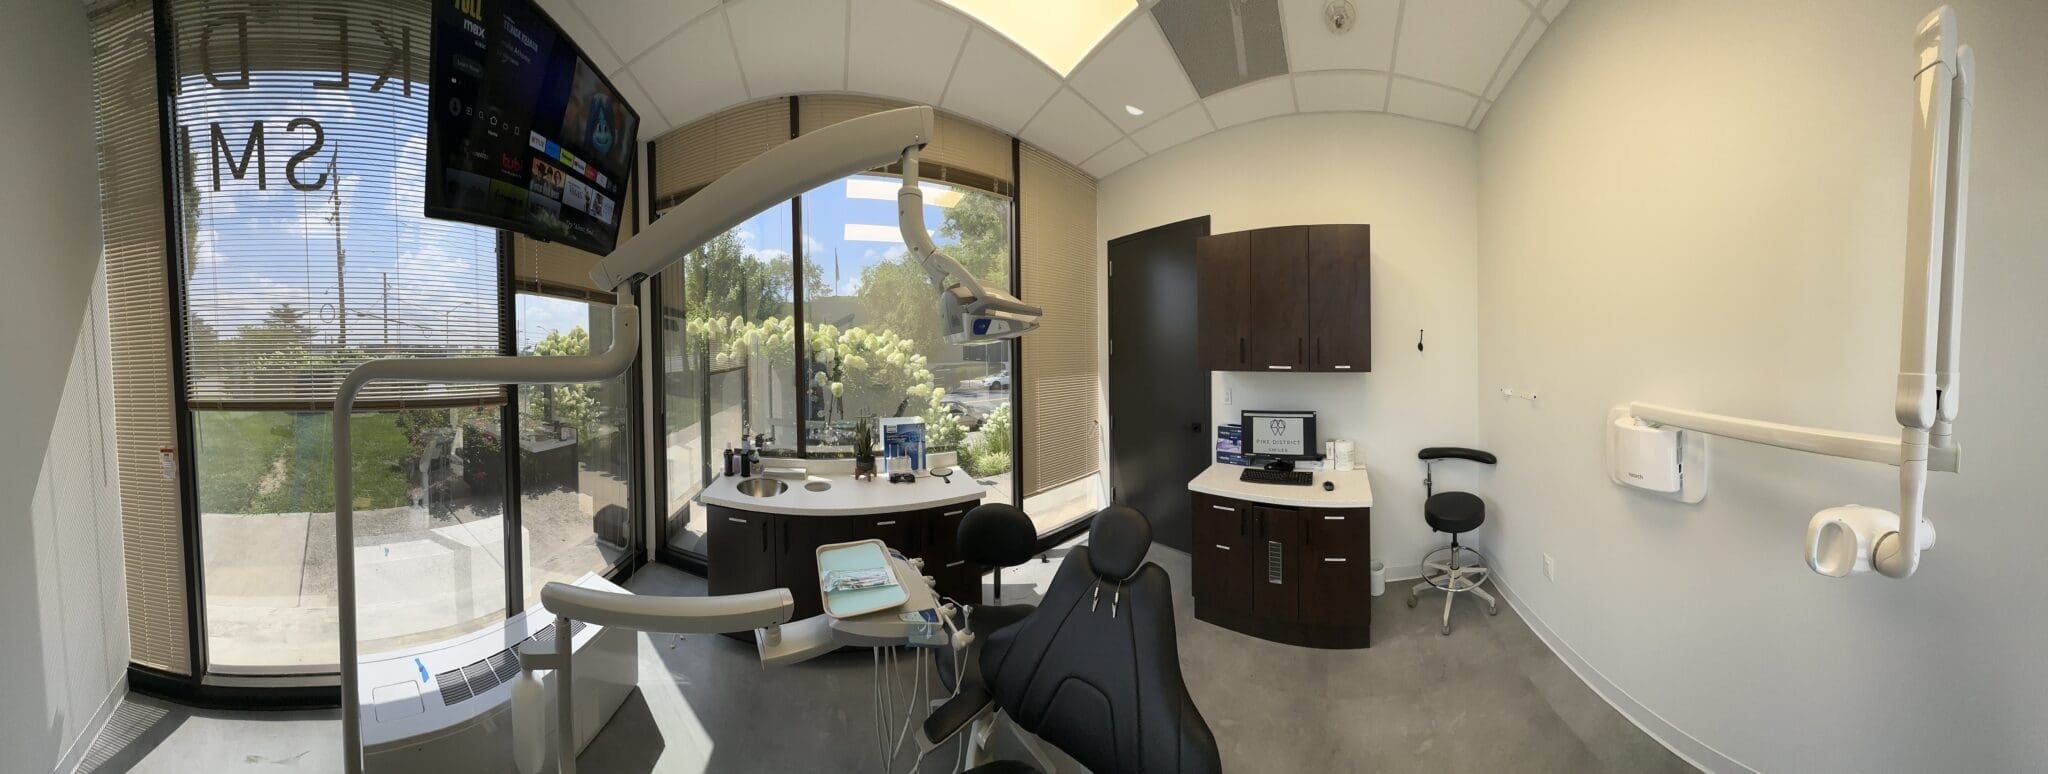 Interior photo of Pike District Smiles clinic, featuring dental chair and two examination desks.